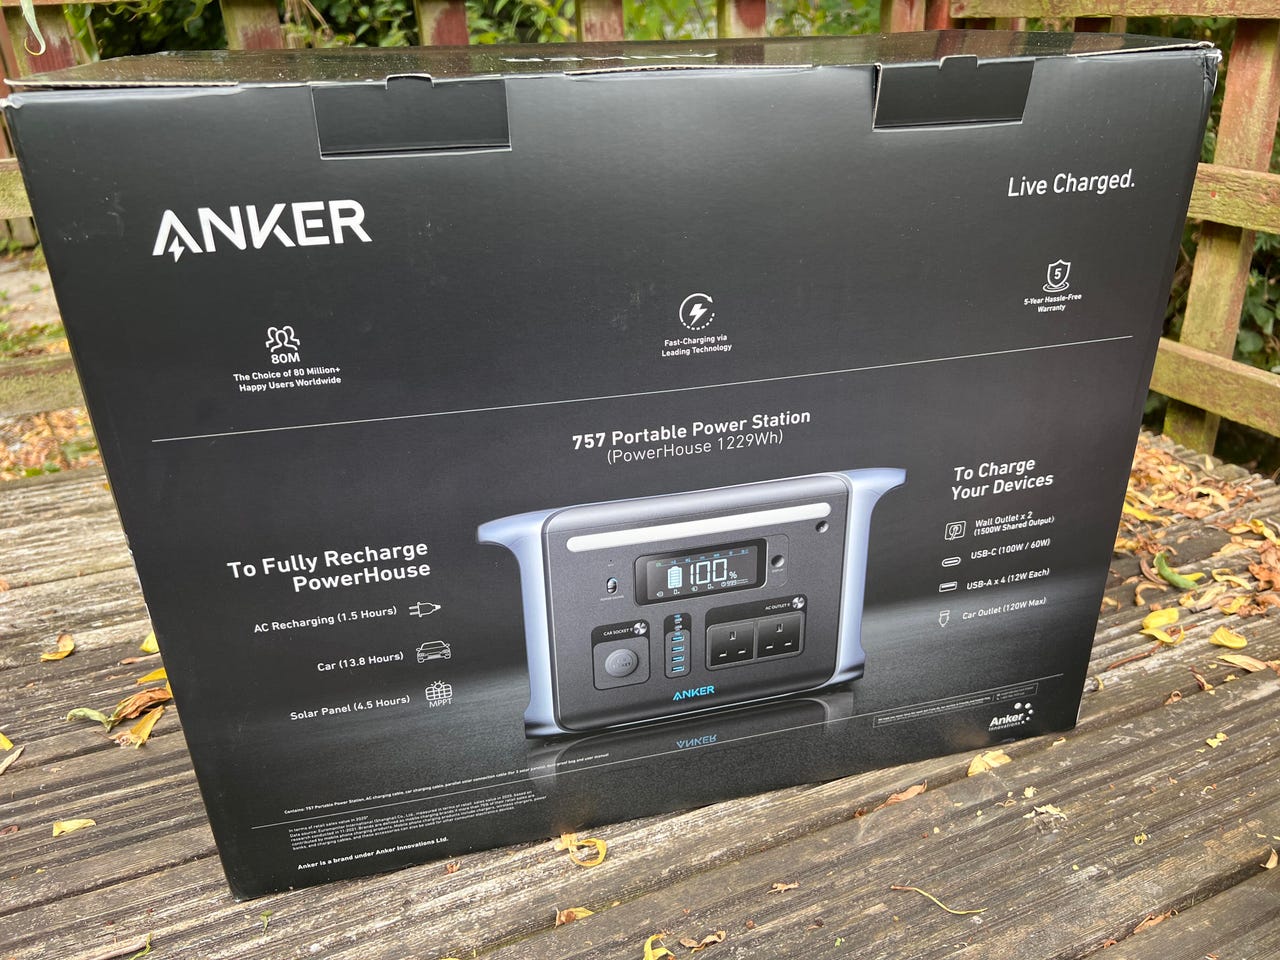 Anker 757 Powerhouse: This awesome power station is now $600 off